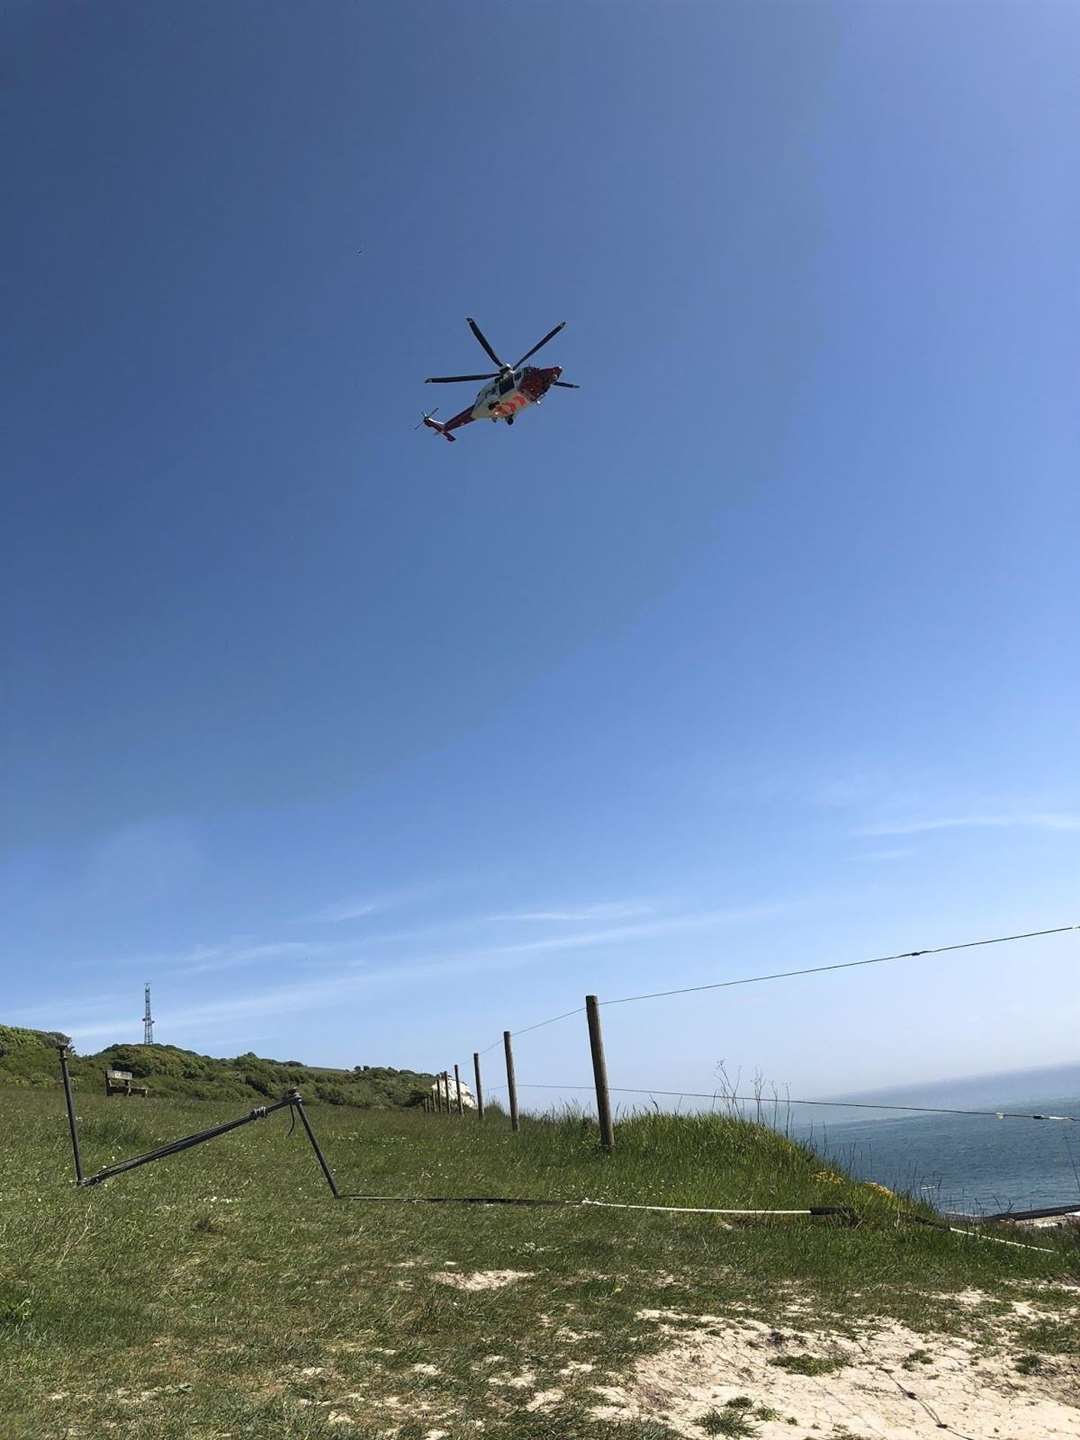 HM Coastguard Lydd helicopter swooped in to save a 13 year old boy clinging to the cliff face near Dover. (1950204)